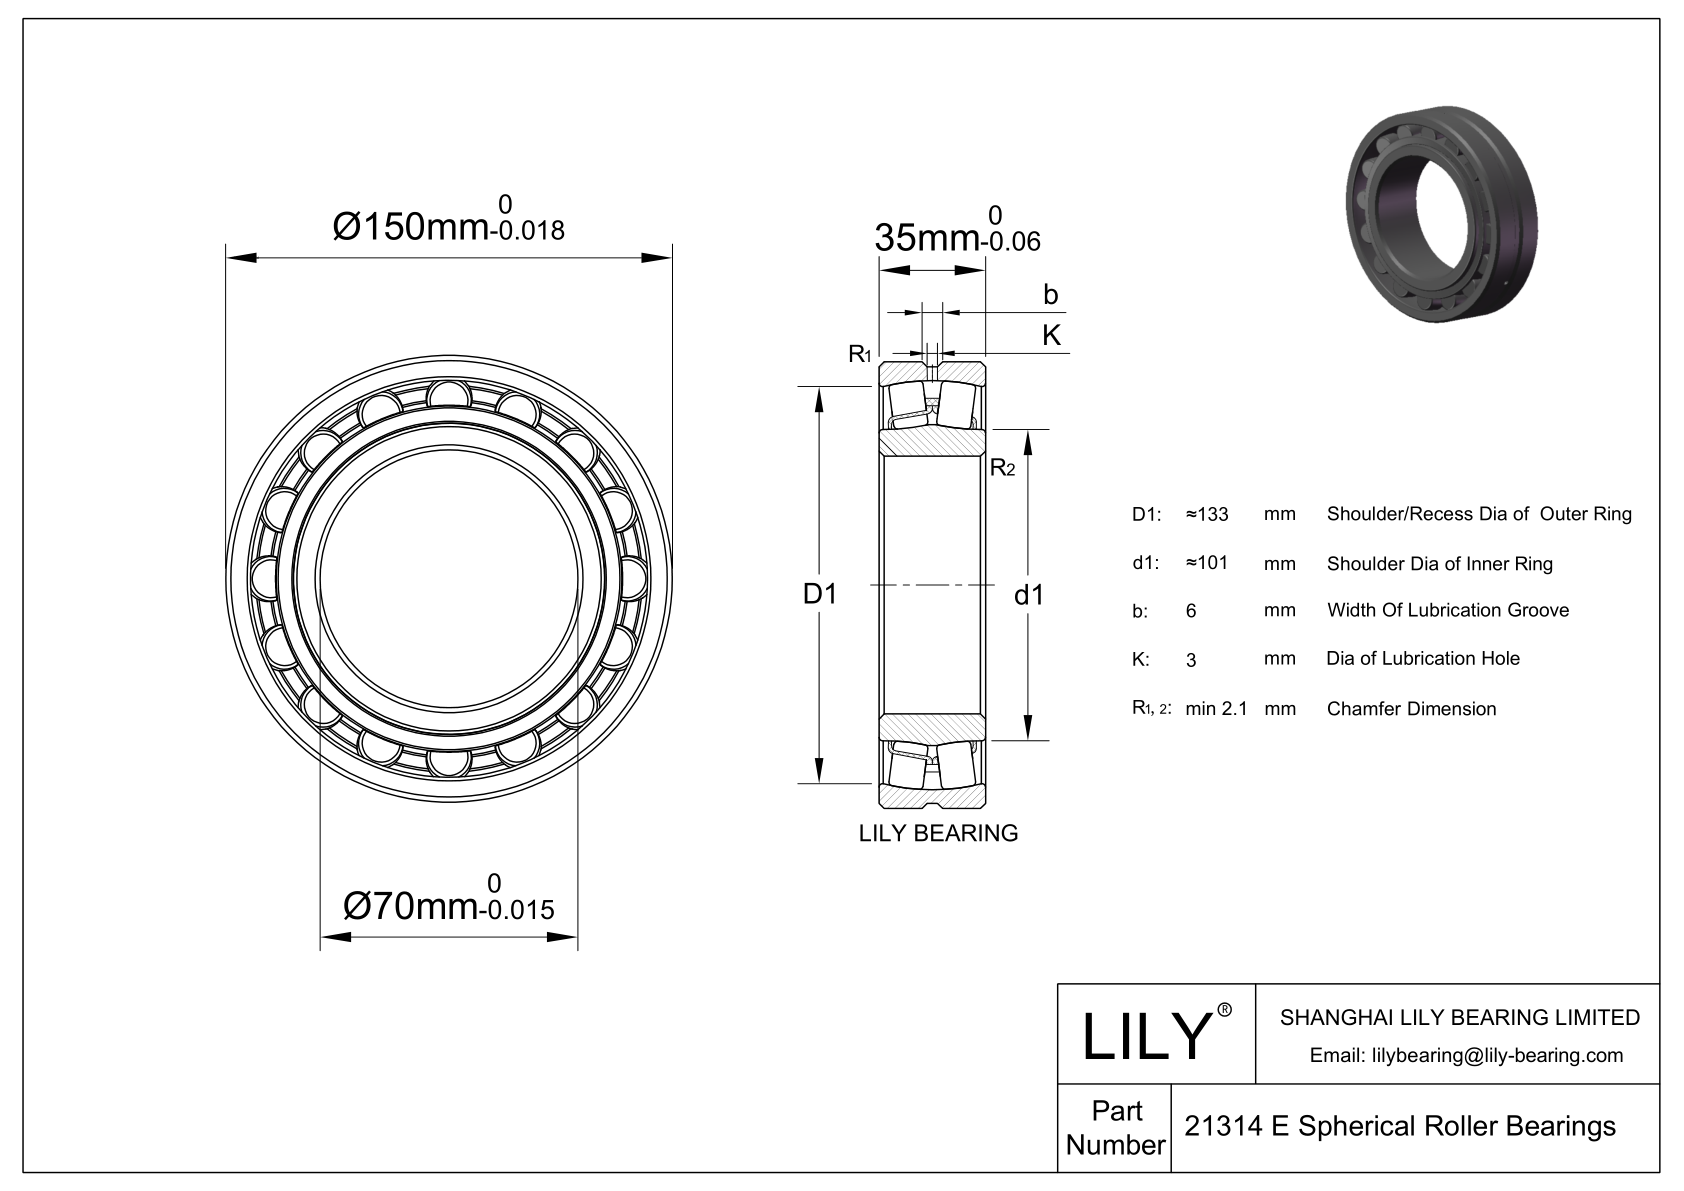 21314 E Double Row Spherical Roller Bearing cad drawing